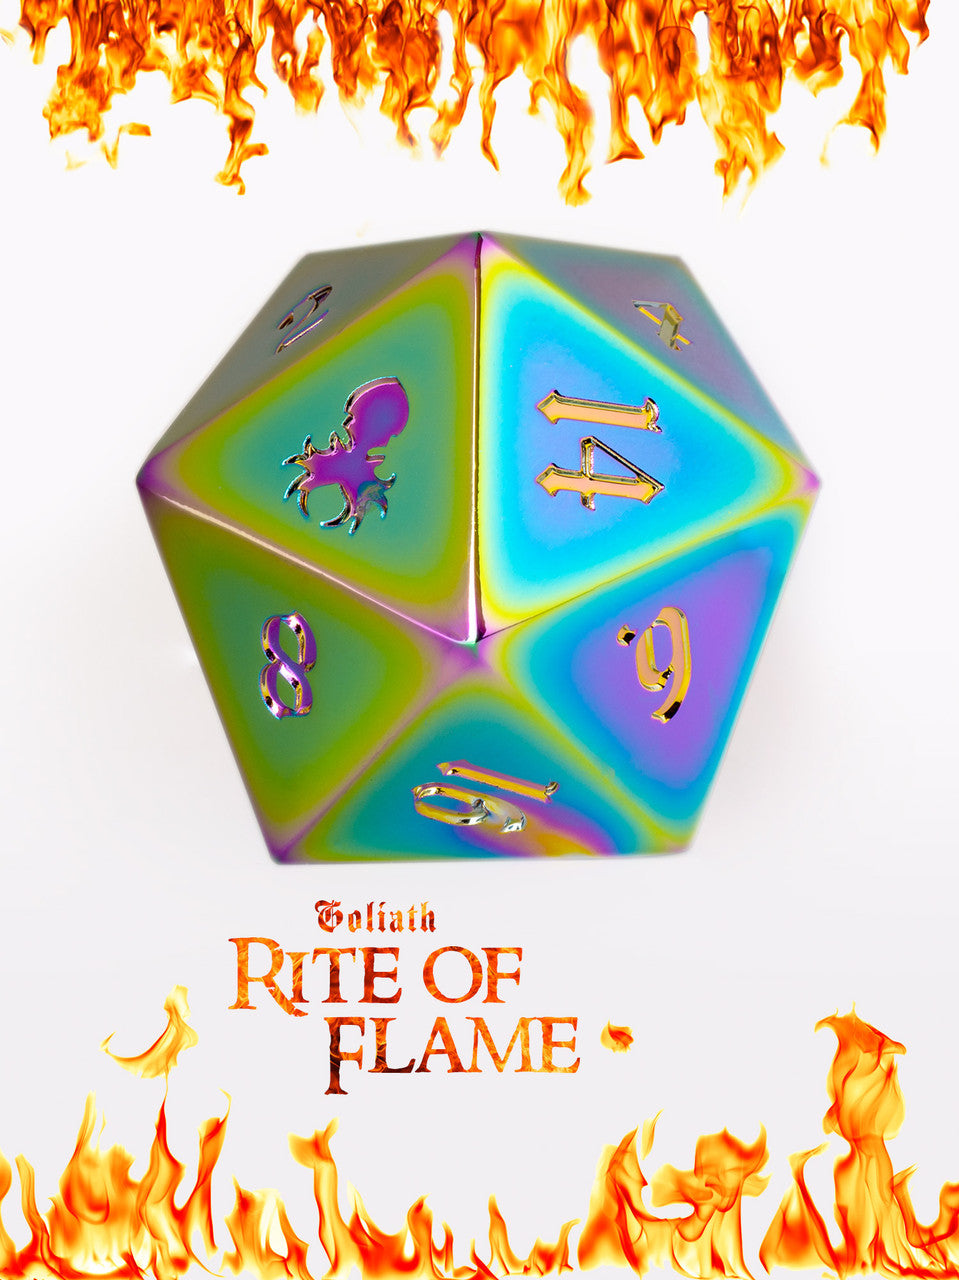 Goliath Rite of Flame 40mm Single D20